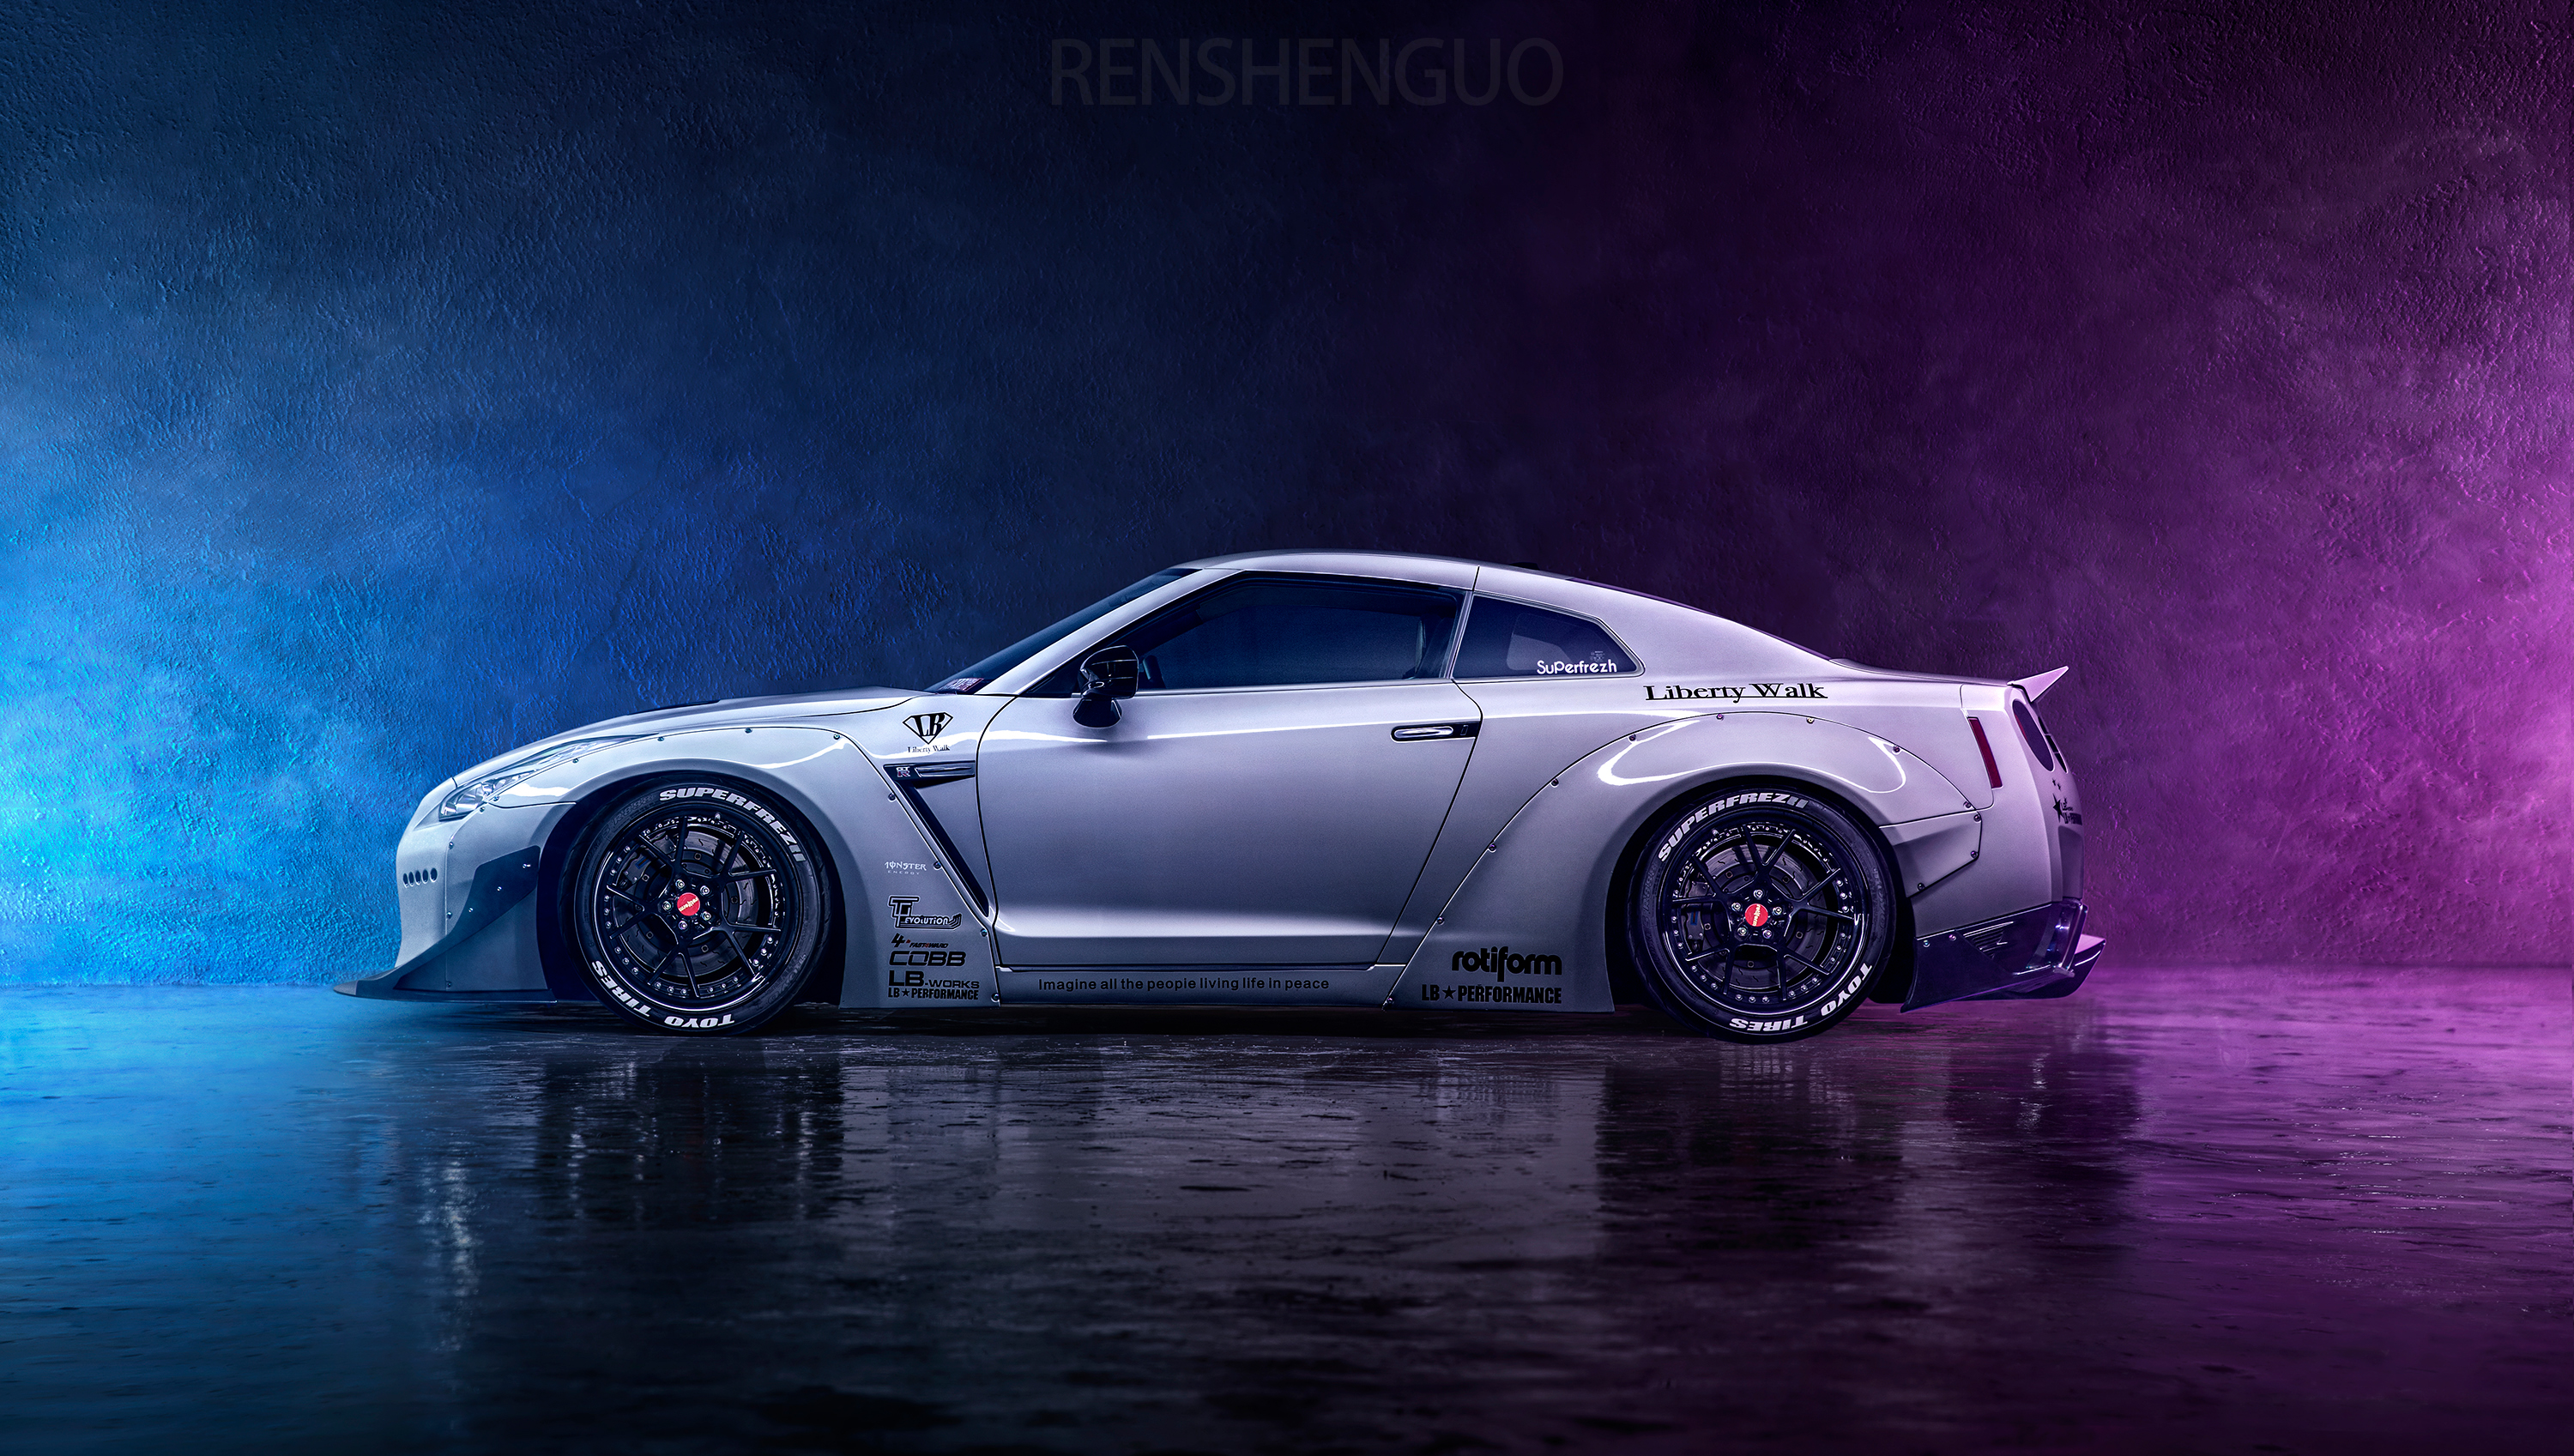 Nissan Gtr 4k 2020 Car, HD Cars, 4k Wallpapers, Images, Backgrounds, Photos  and Pictures